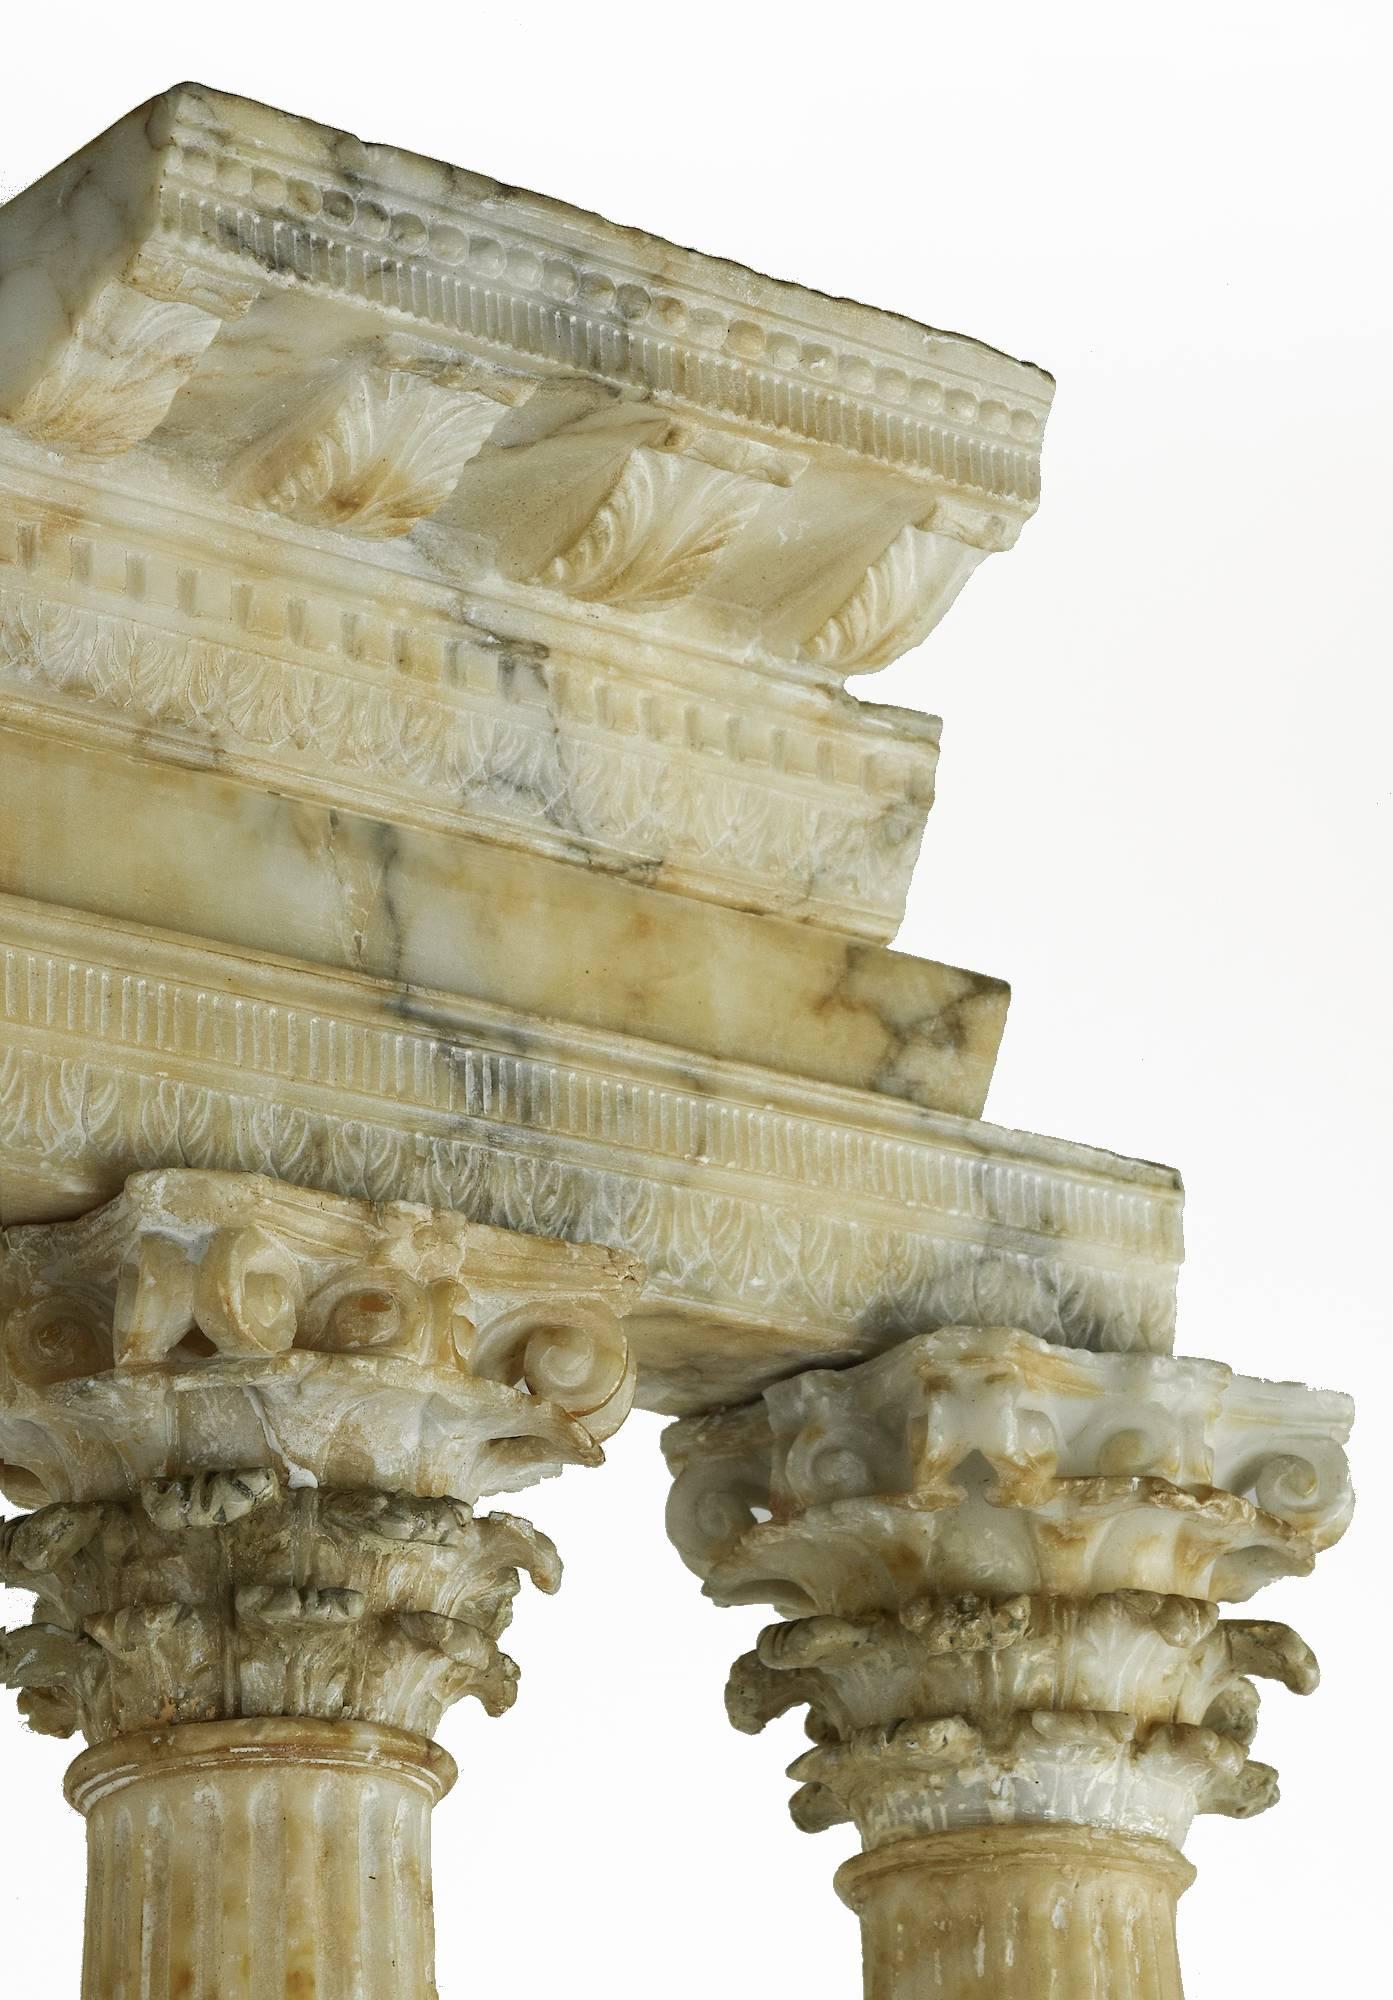 Grand Tour Alabaster Model of the Temple of Castor and Pollux, Rome, circa 1870 In Excellent Condition For Sale In Lafayette, CA